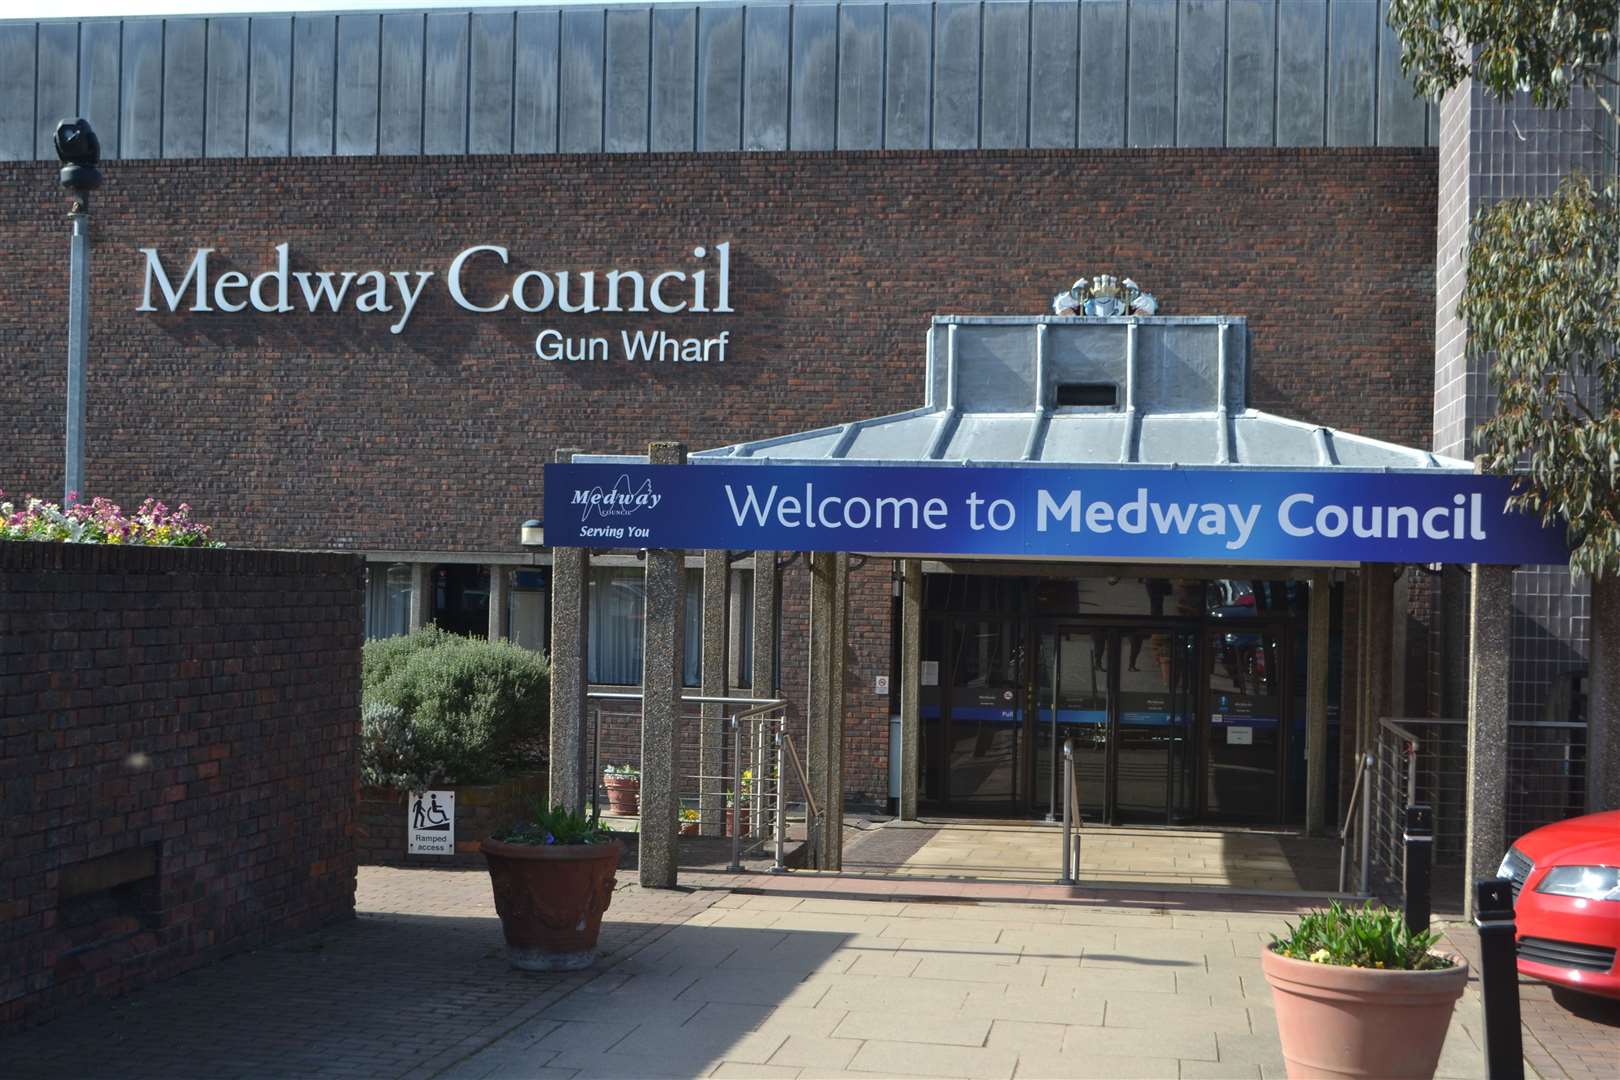 Medway council declared a climate emergency in April